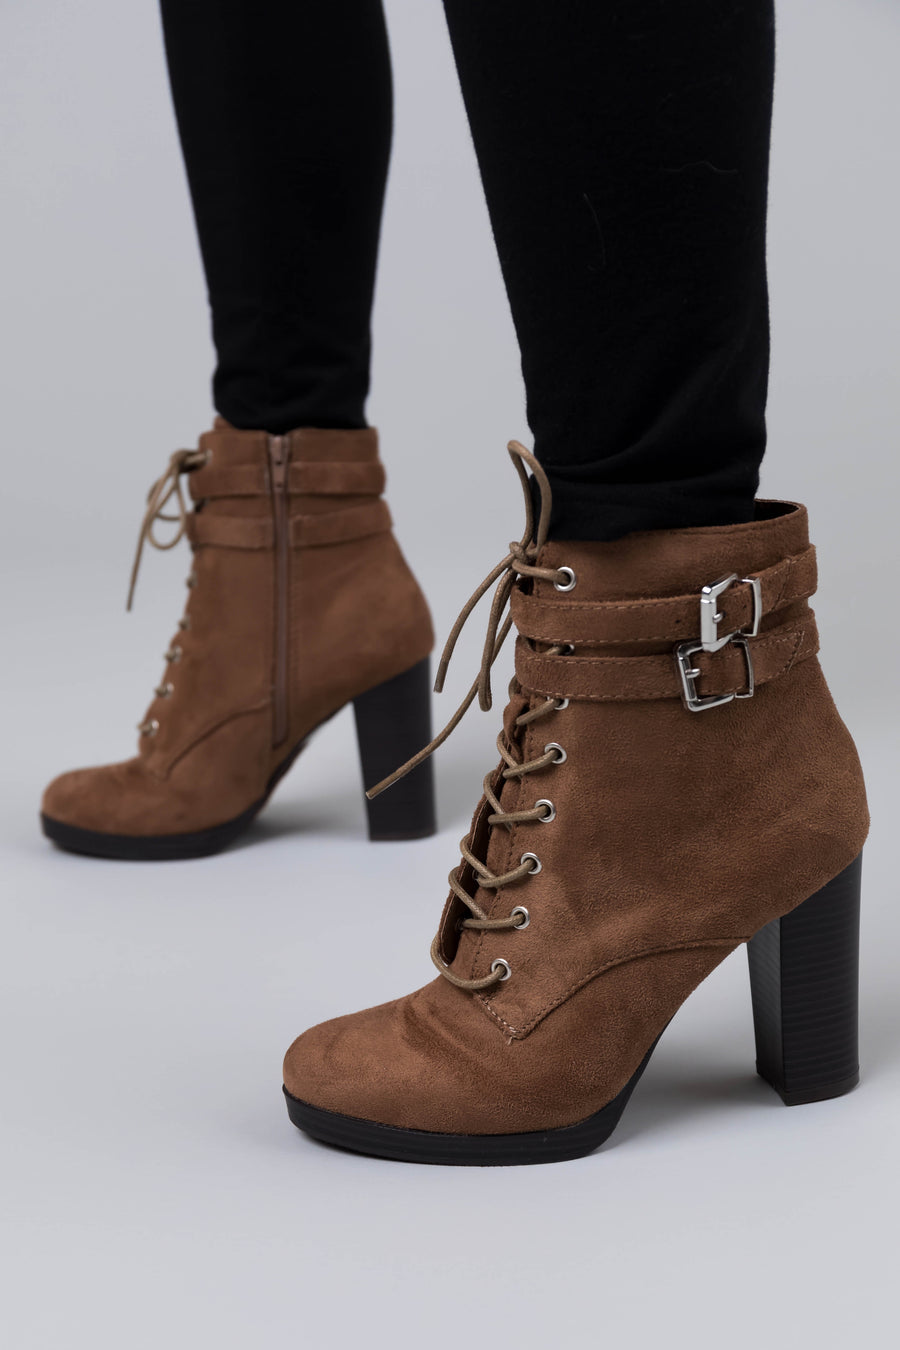 Milk Chocolate Faux Suede Lace Up High Heel Booties